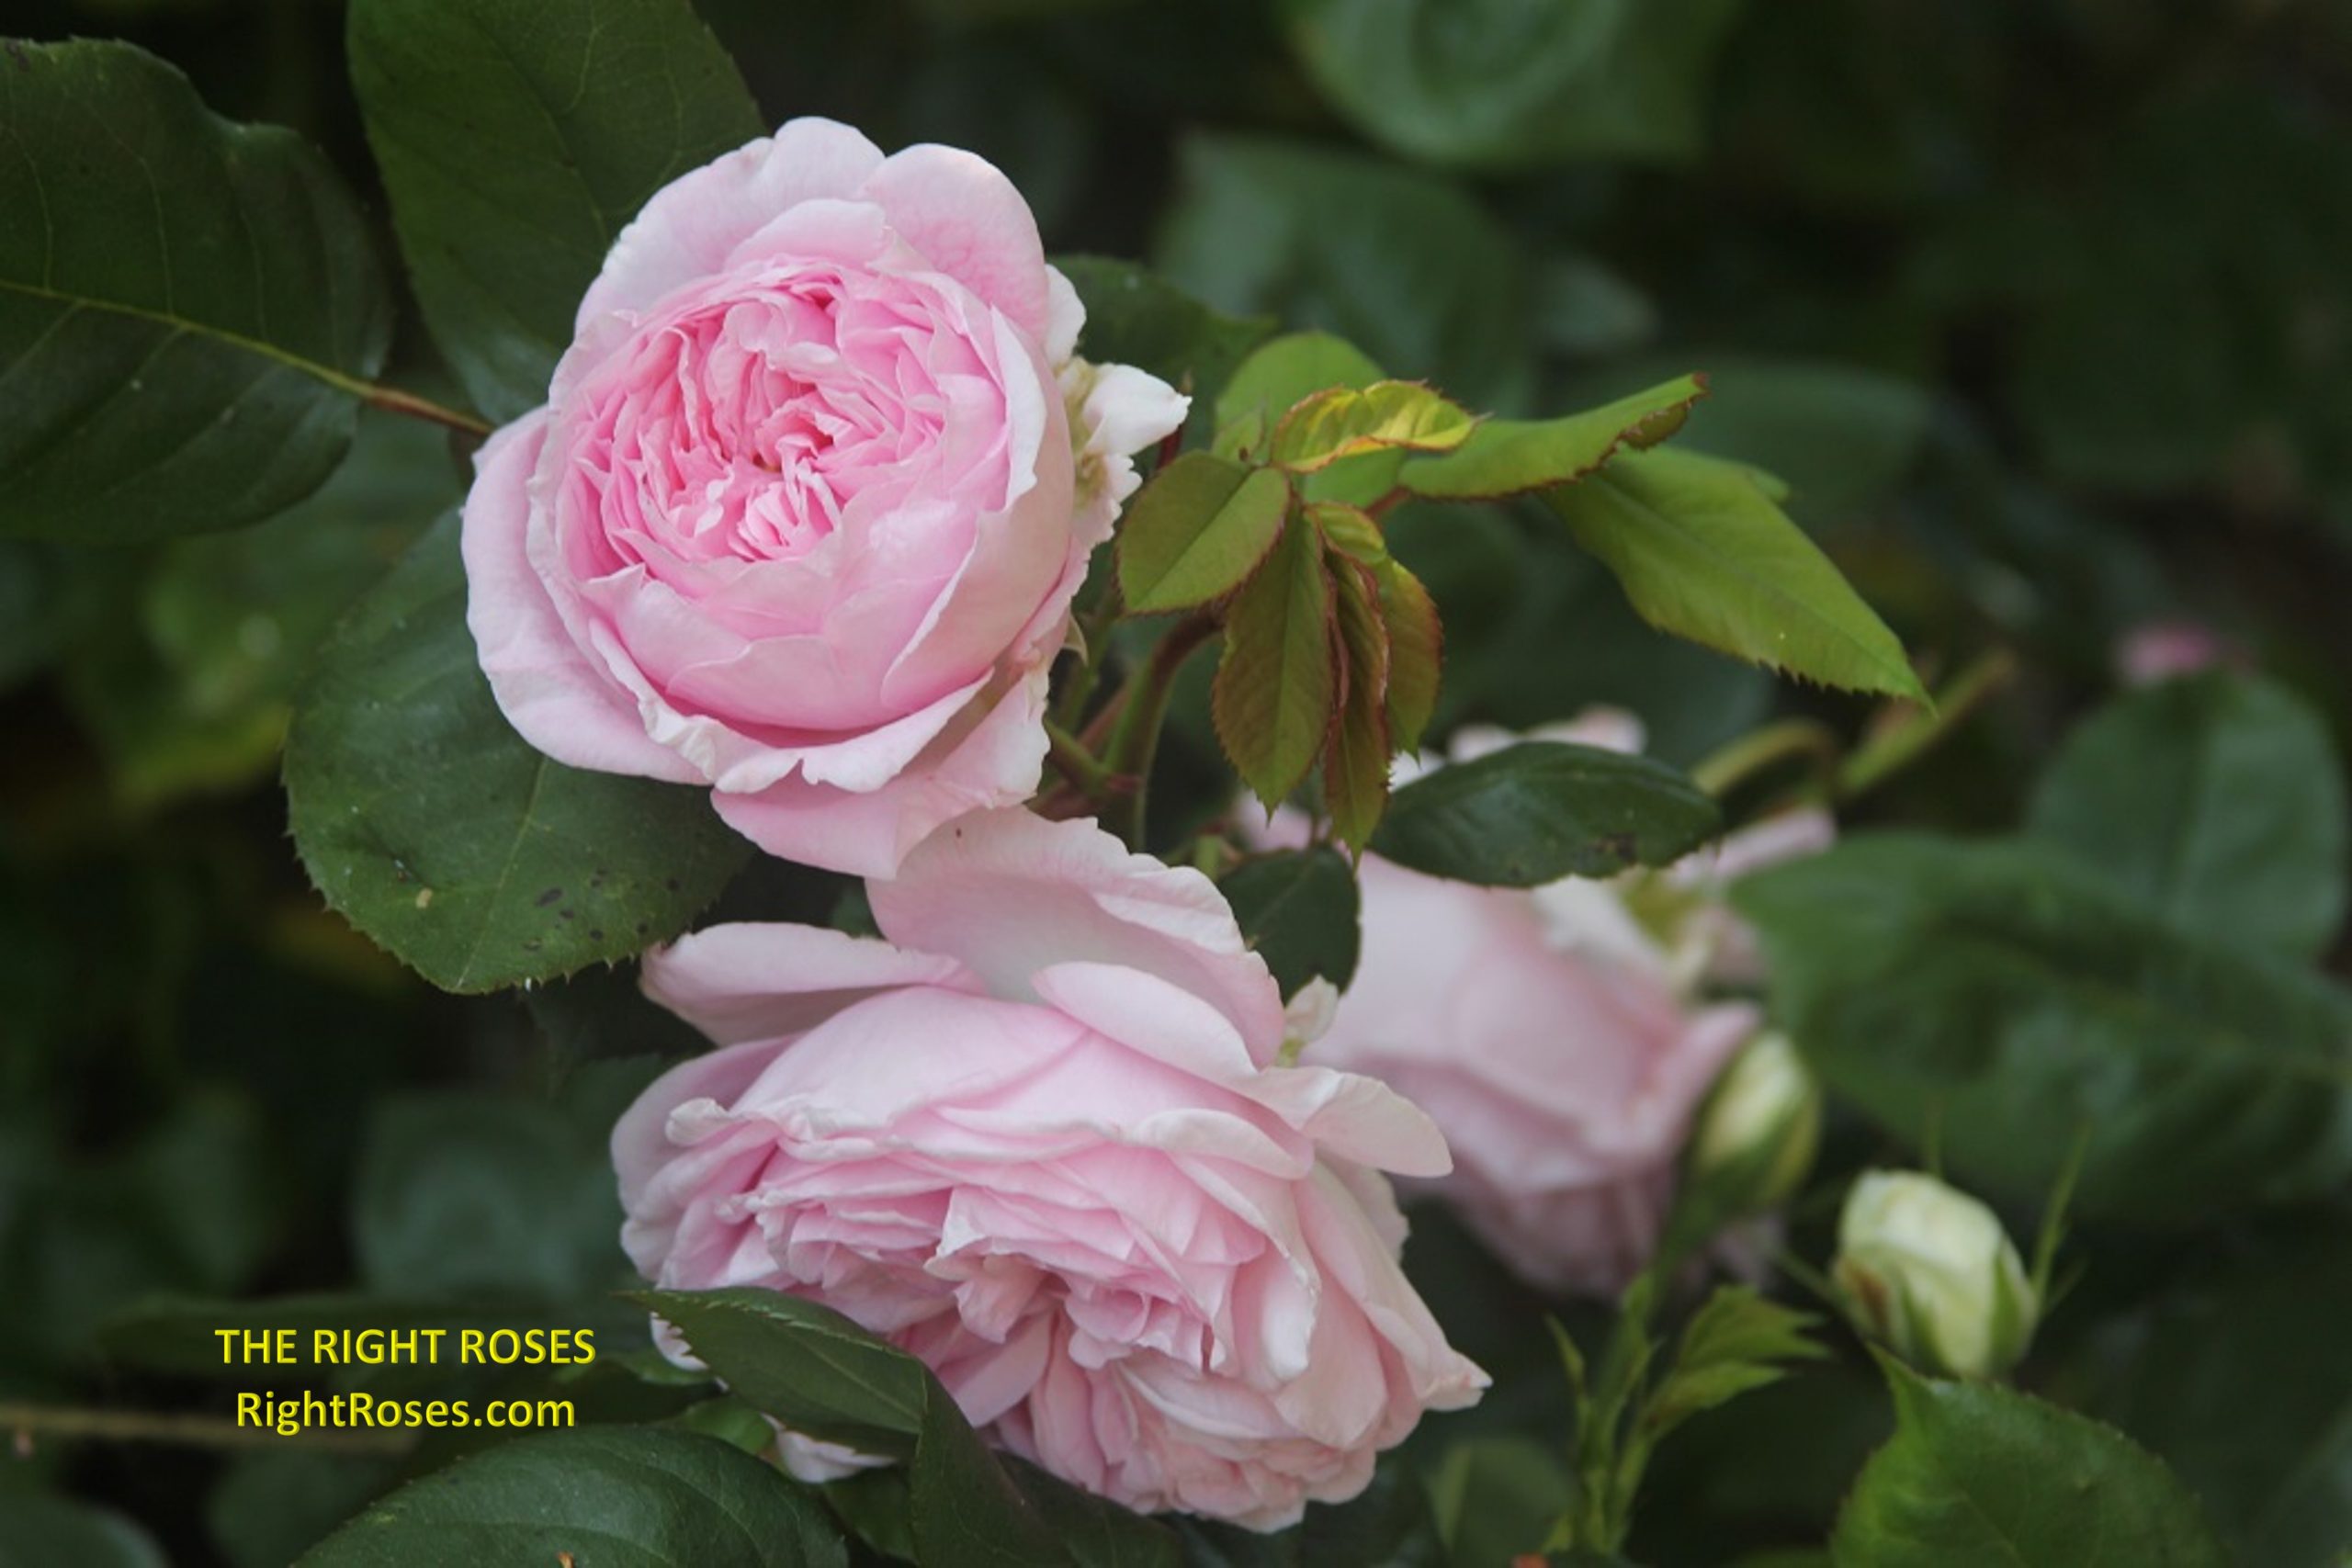 The Right Roses presents you with the best rose review of rose ‘Summer Romance’ (aka. Lovely Parfuma, Comtesse Marie-Henriette, Madame De Maintenon, Parfuma Summer Romance, Rosengräfin Marie Henriette, Marie Henriette) | Kordes Rosen 2013. Millions of gardeners from all over the world have trusted our in-depth reviews. The Right Roses team uses our own, bespoke The Right Roses Score, which is the most comprehensive rose rating system in the world, to assess the overall quality of a rose. We review all the very best roses from all the best rose breeders such as Rosen Kordes, Rosen Tantau, Delbard, David Austin Roses. The Right Roses is also running the best gardening club for the very best connoisseur gardeners and garden designers at Righttify.com. At Righttify.com, connoisseur sellers can design gardens, provide gardening services, gardening courses, and provide garden consulting services.